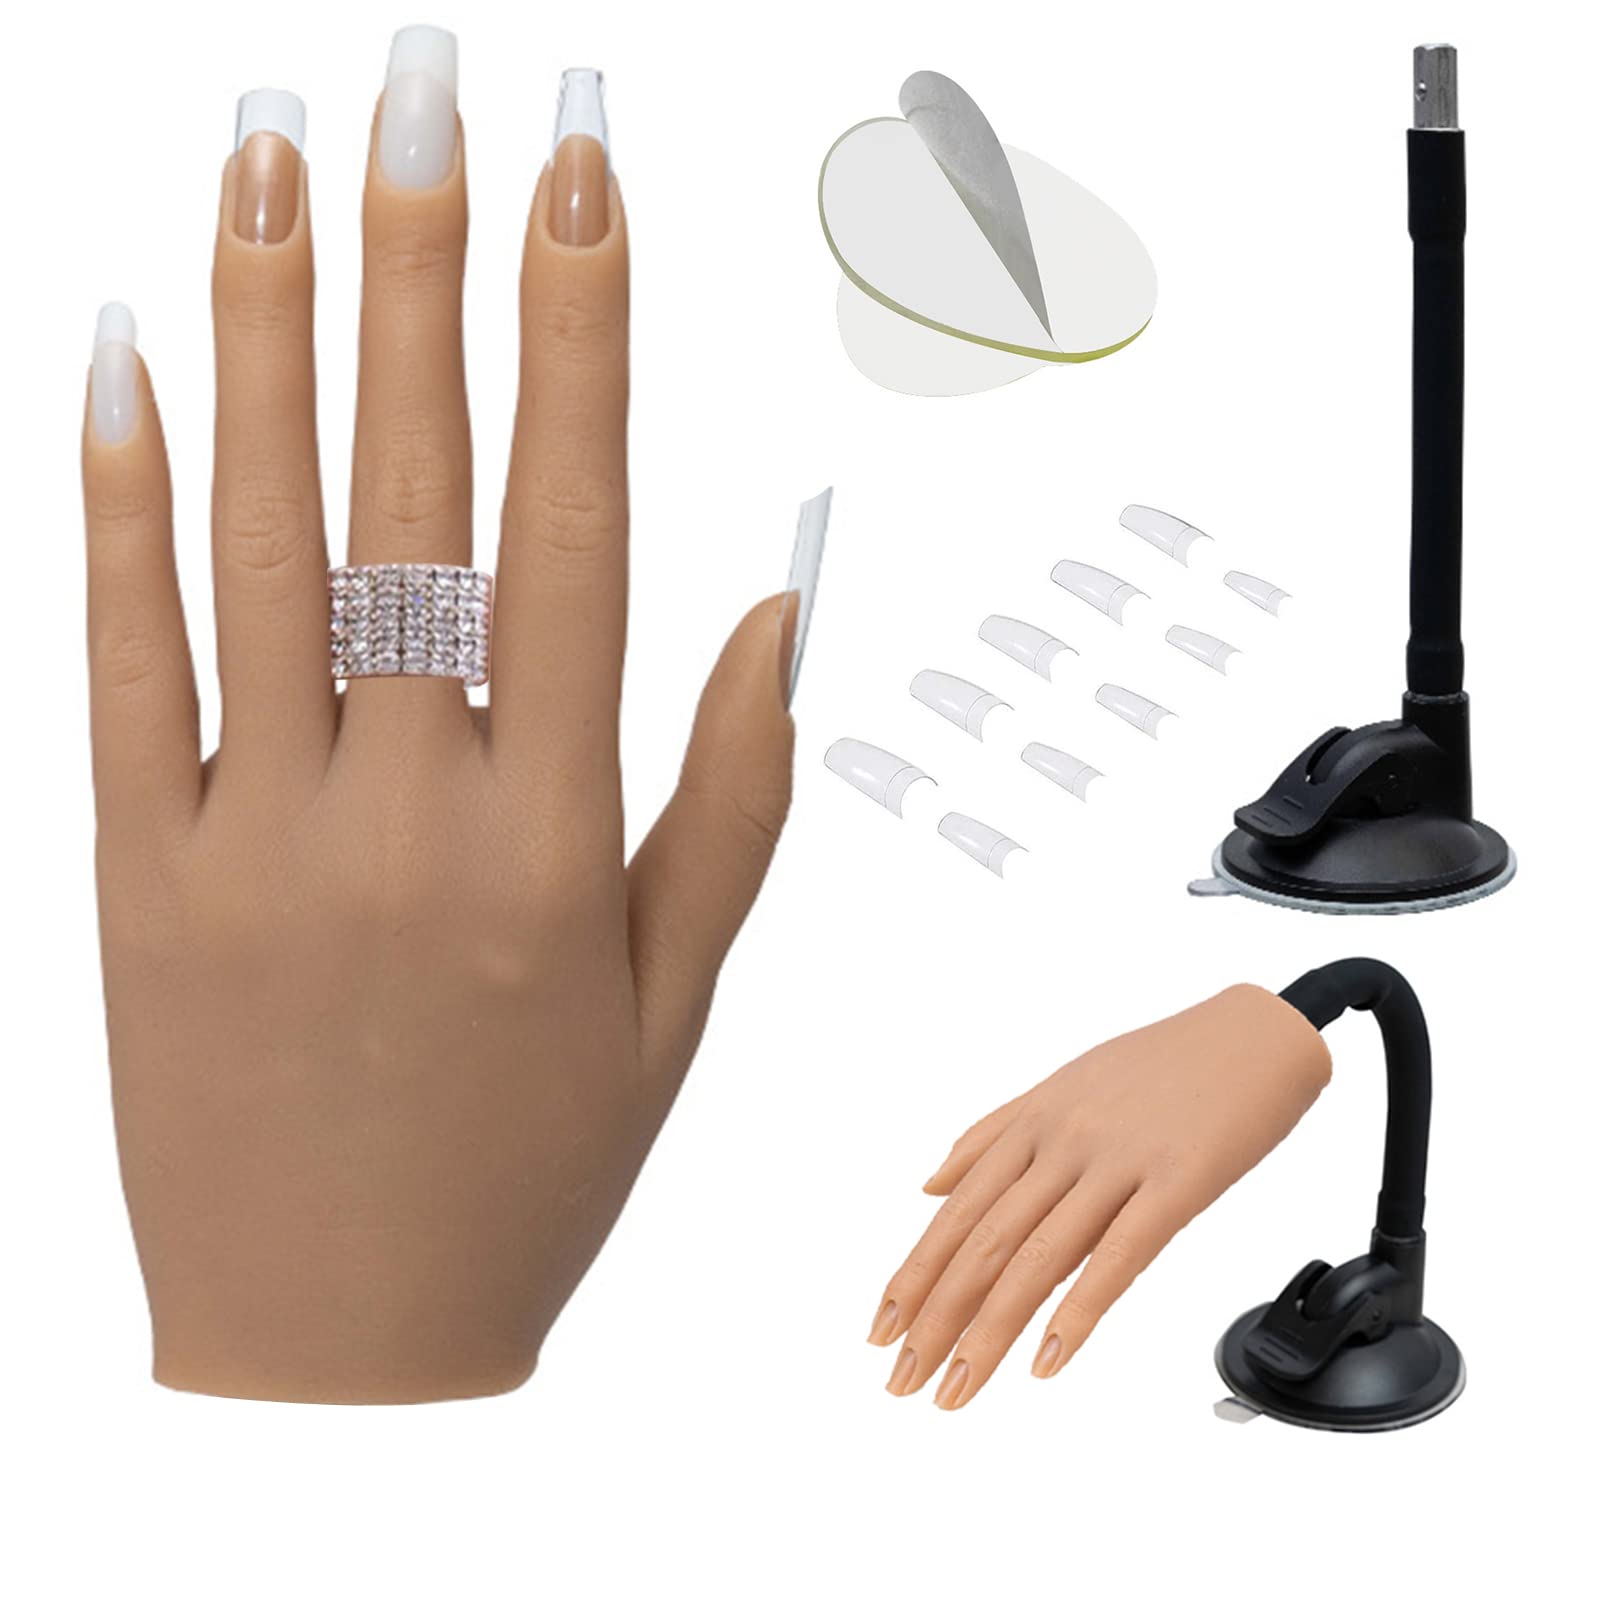 Flexible Bendable Fake Hands For Nails For DIY Salon Artists Realistic Hand  Liquid Silicone Mannequin For Finger Training And Acrylic Manicure Practice  From Jiaogao, $45.47